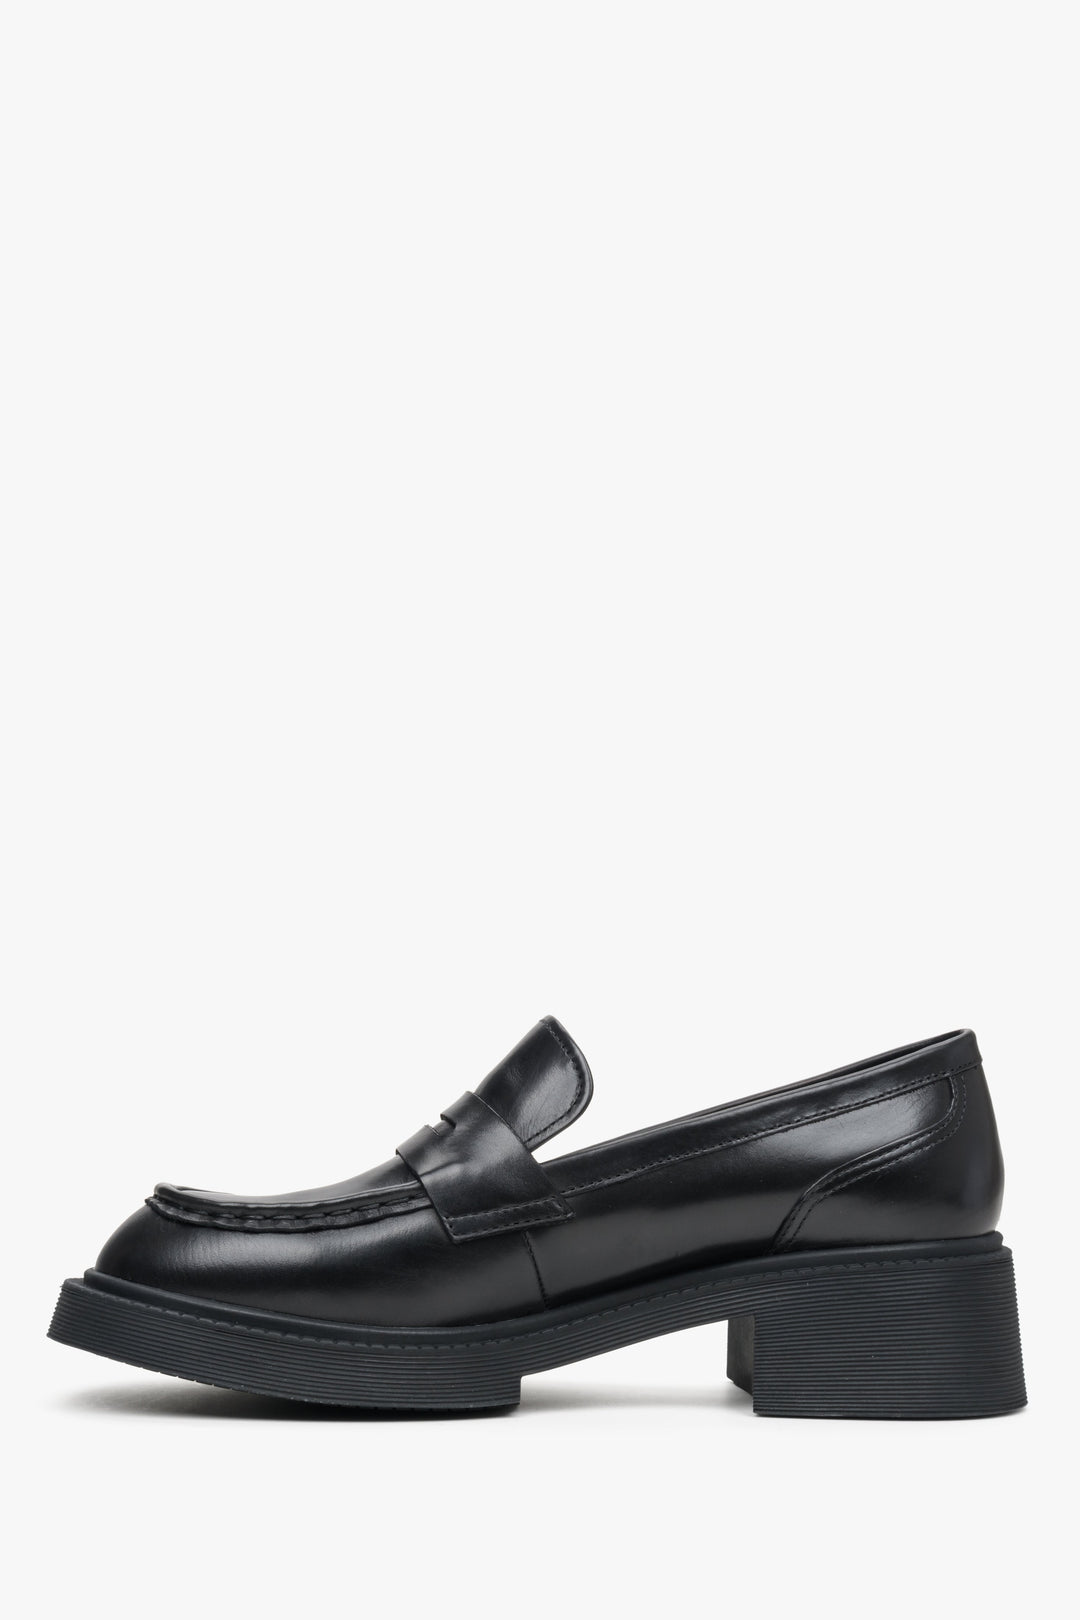 Leather, women's black moccasins with a stable heel - shoe profile.